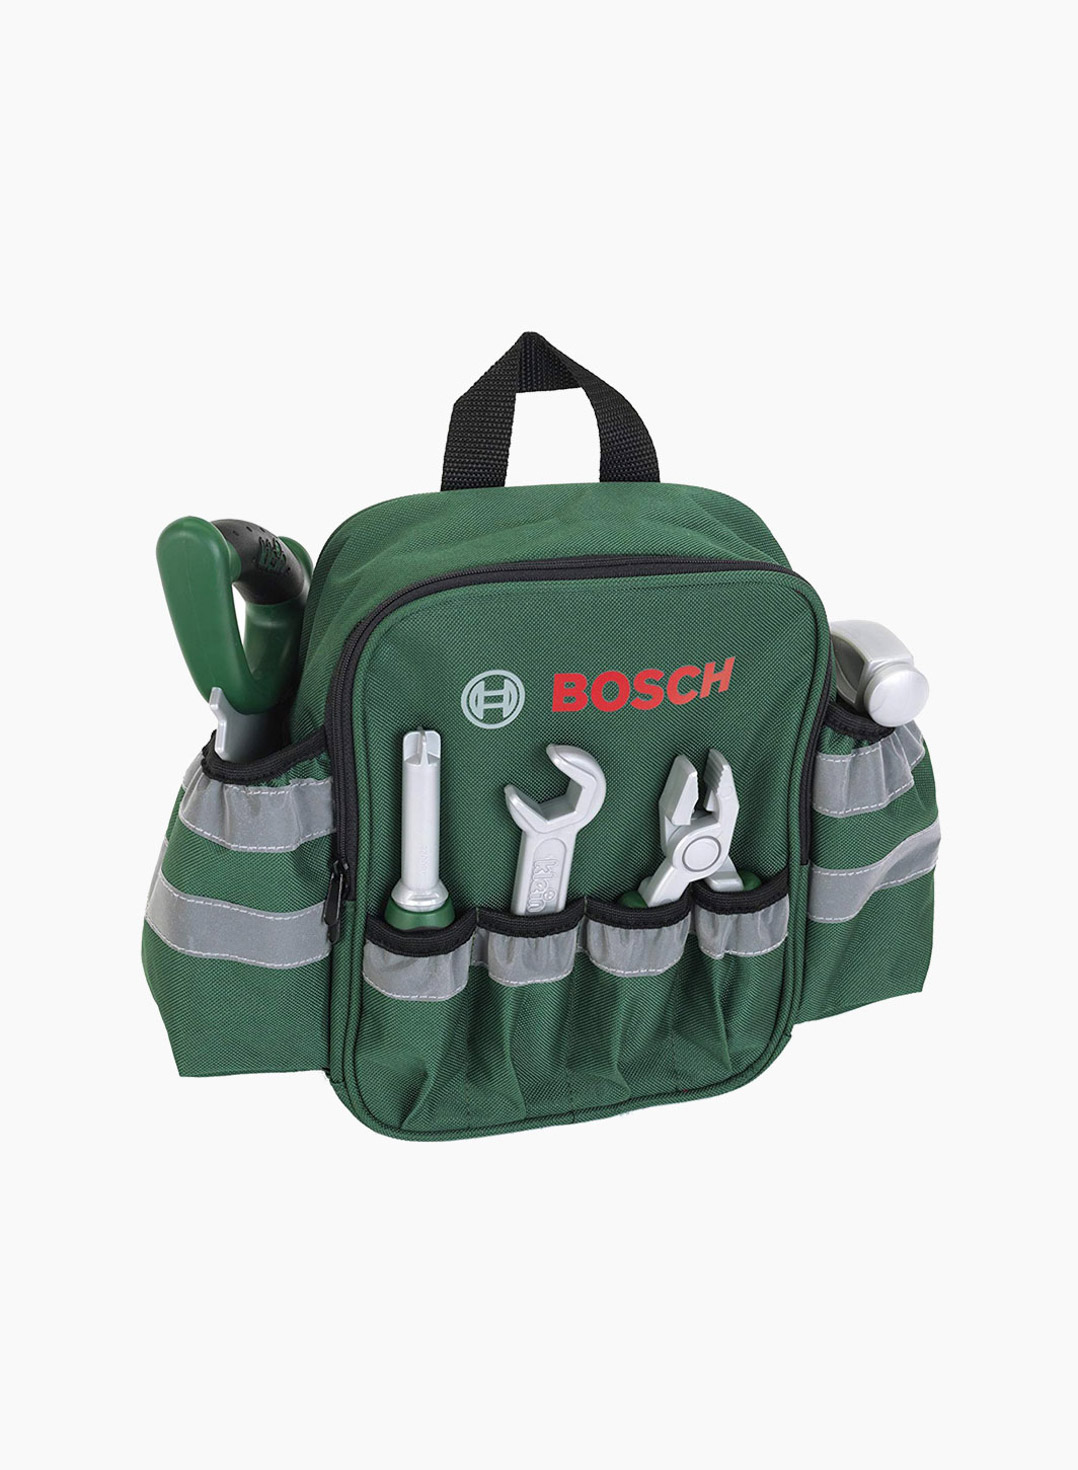 Klein Bosch Tools in Backpack